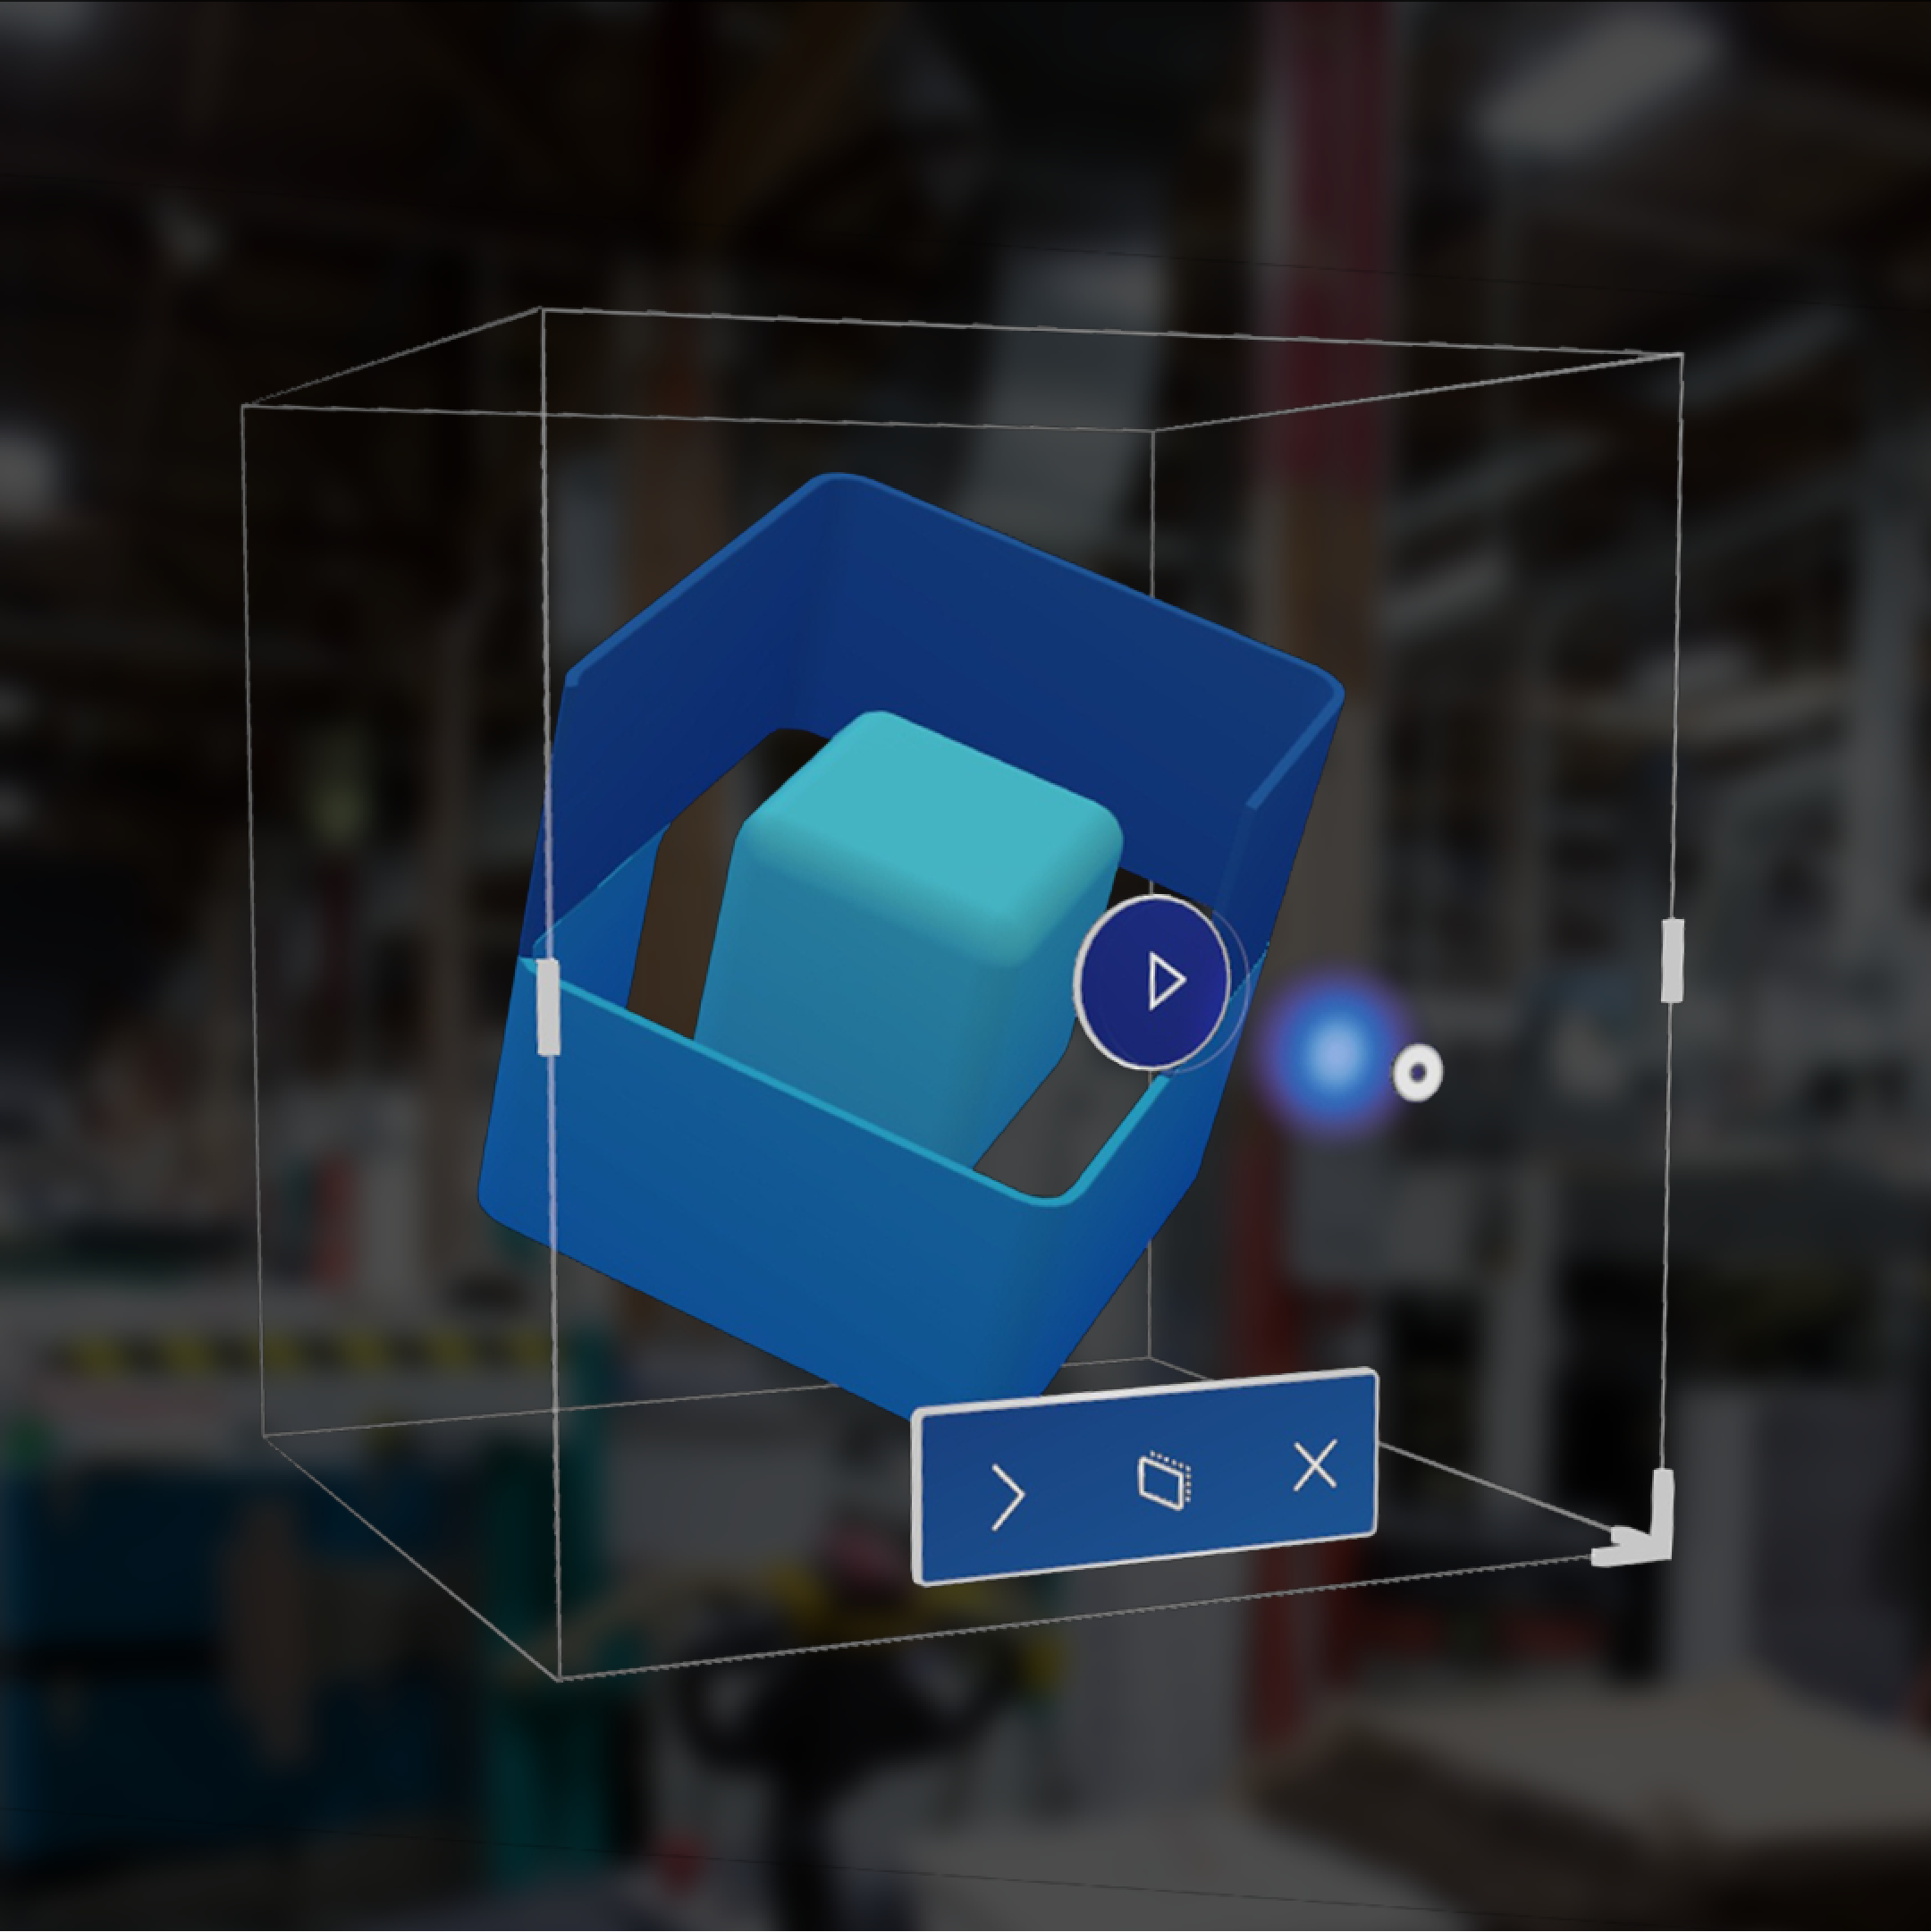 Screenshot of the HoloLens field of view, showing the live cube or 3D app launcher.